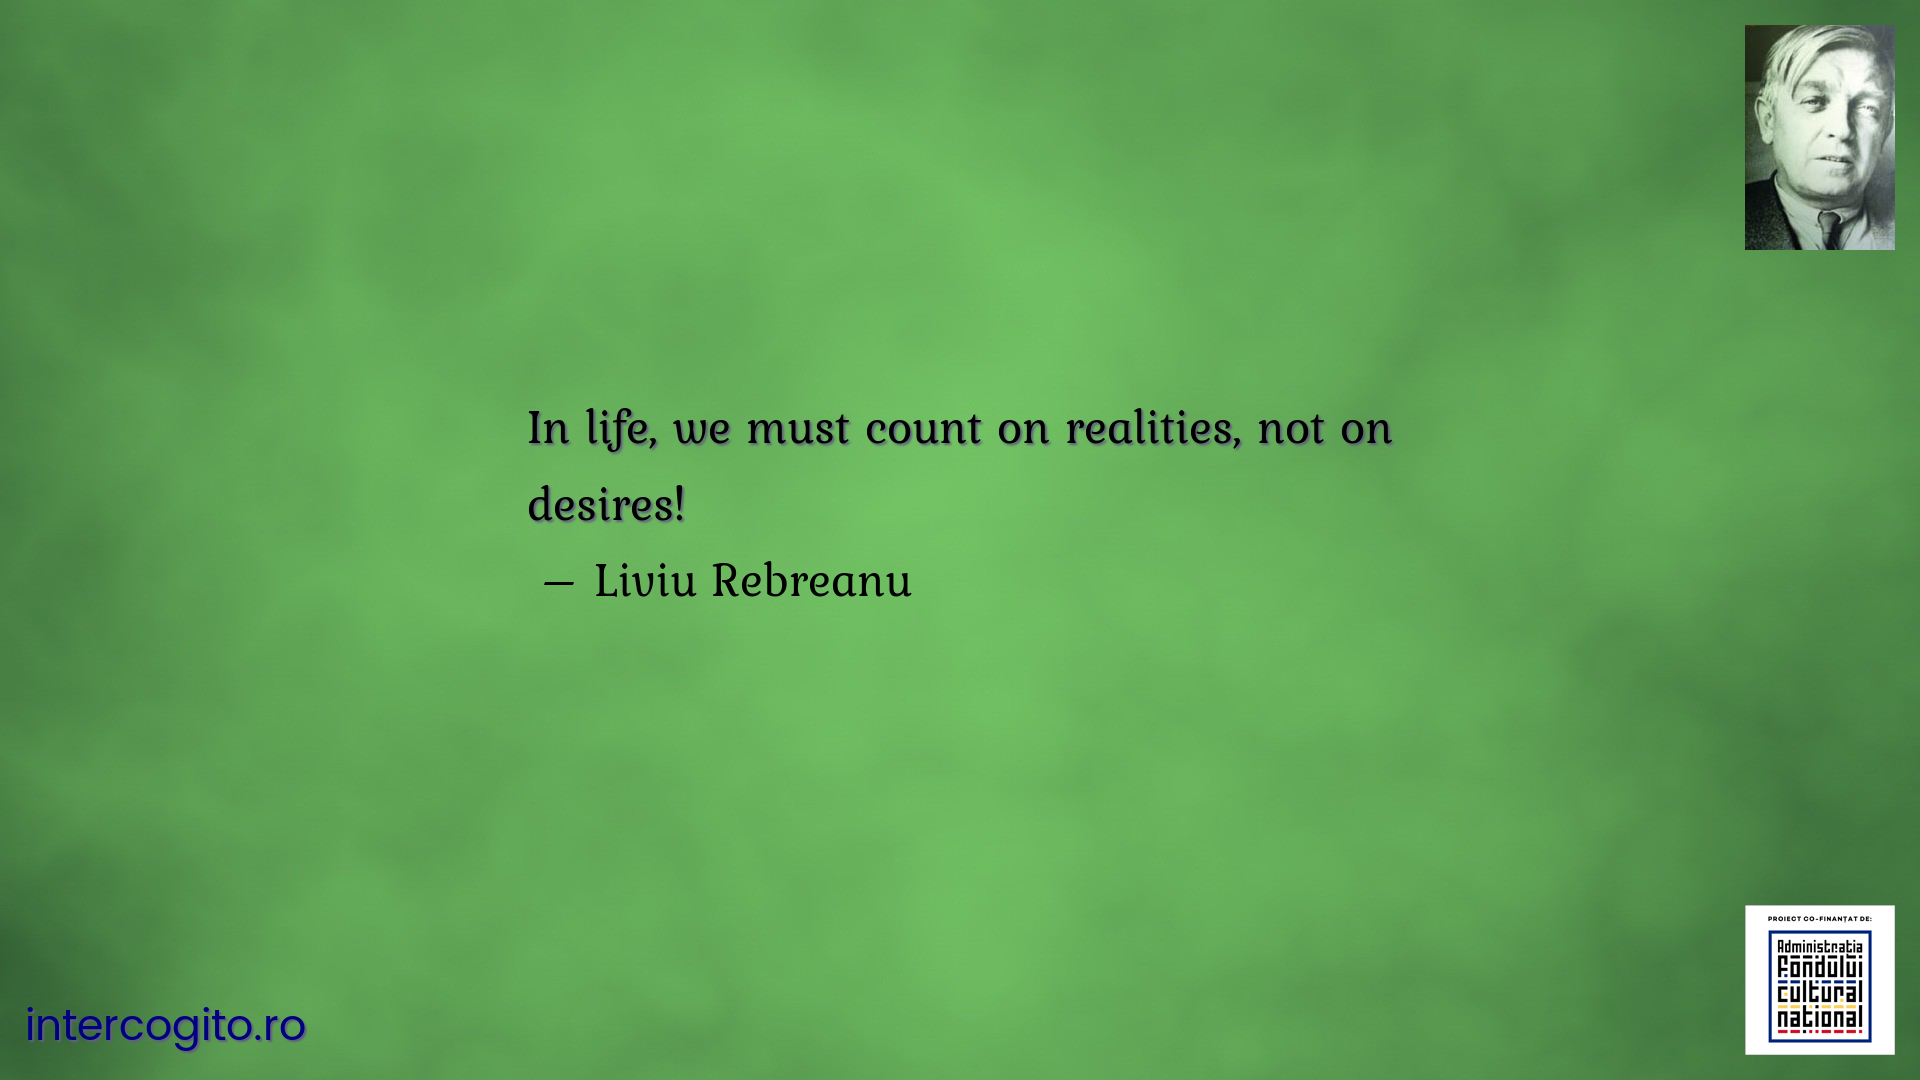 In life, we must count on realities, not on desires!